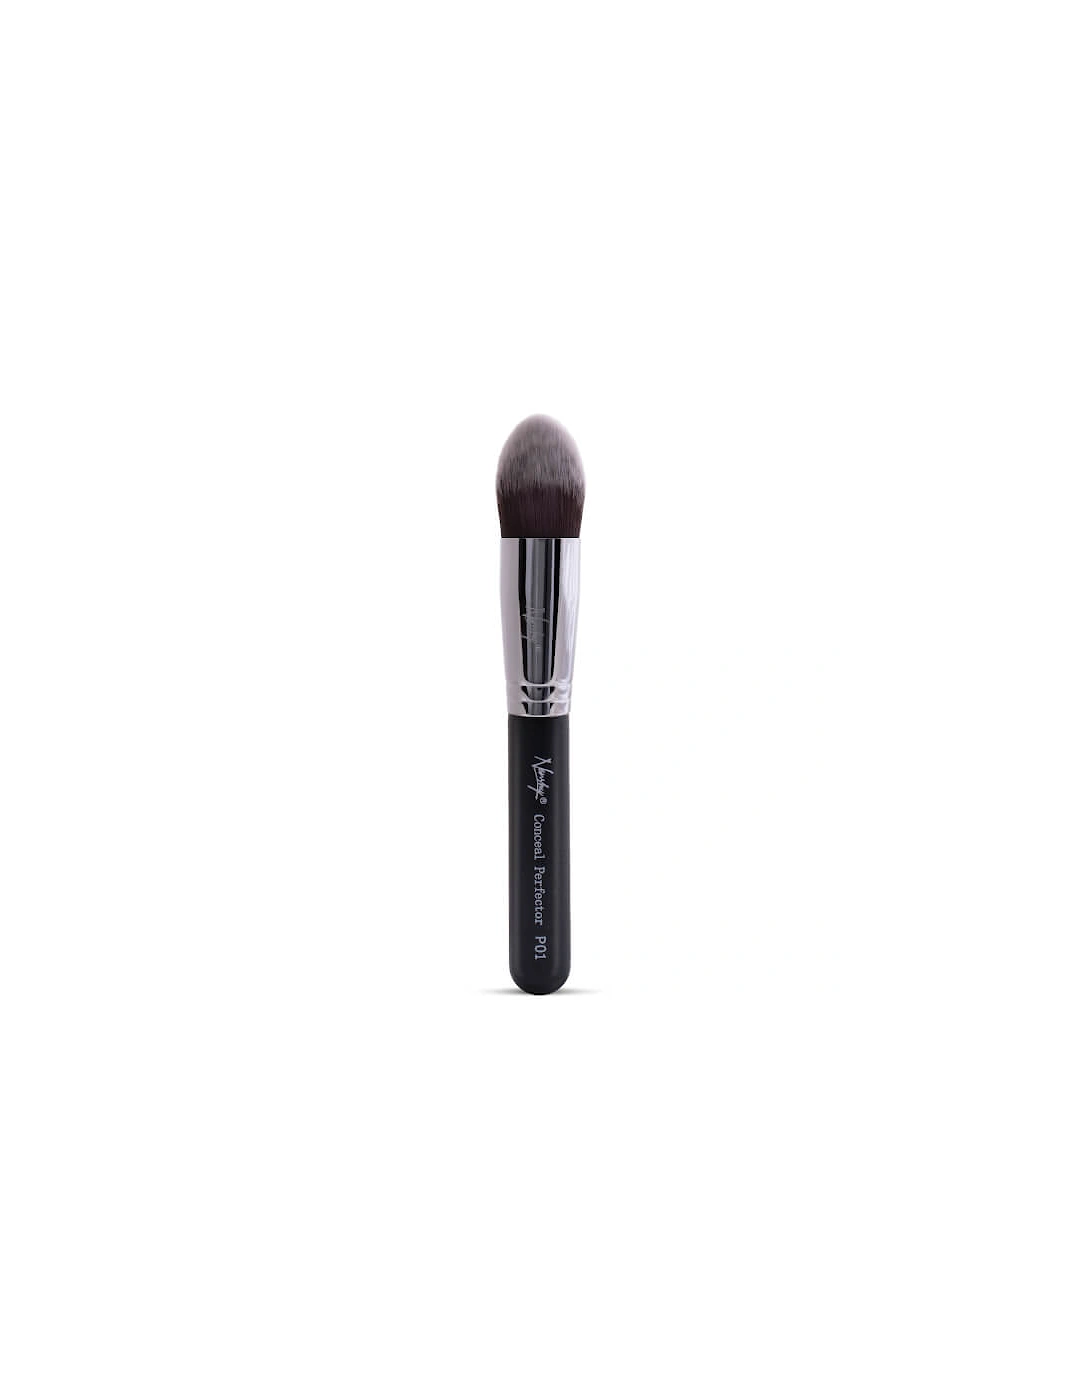 Conceal Perfector Brush - Onyx Black, 2 of 1